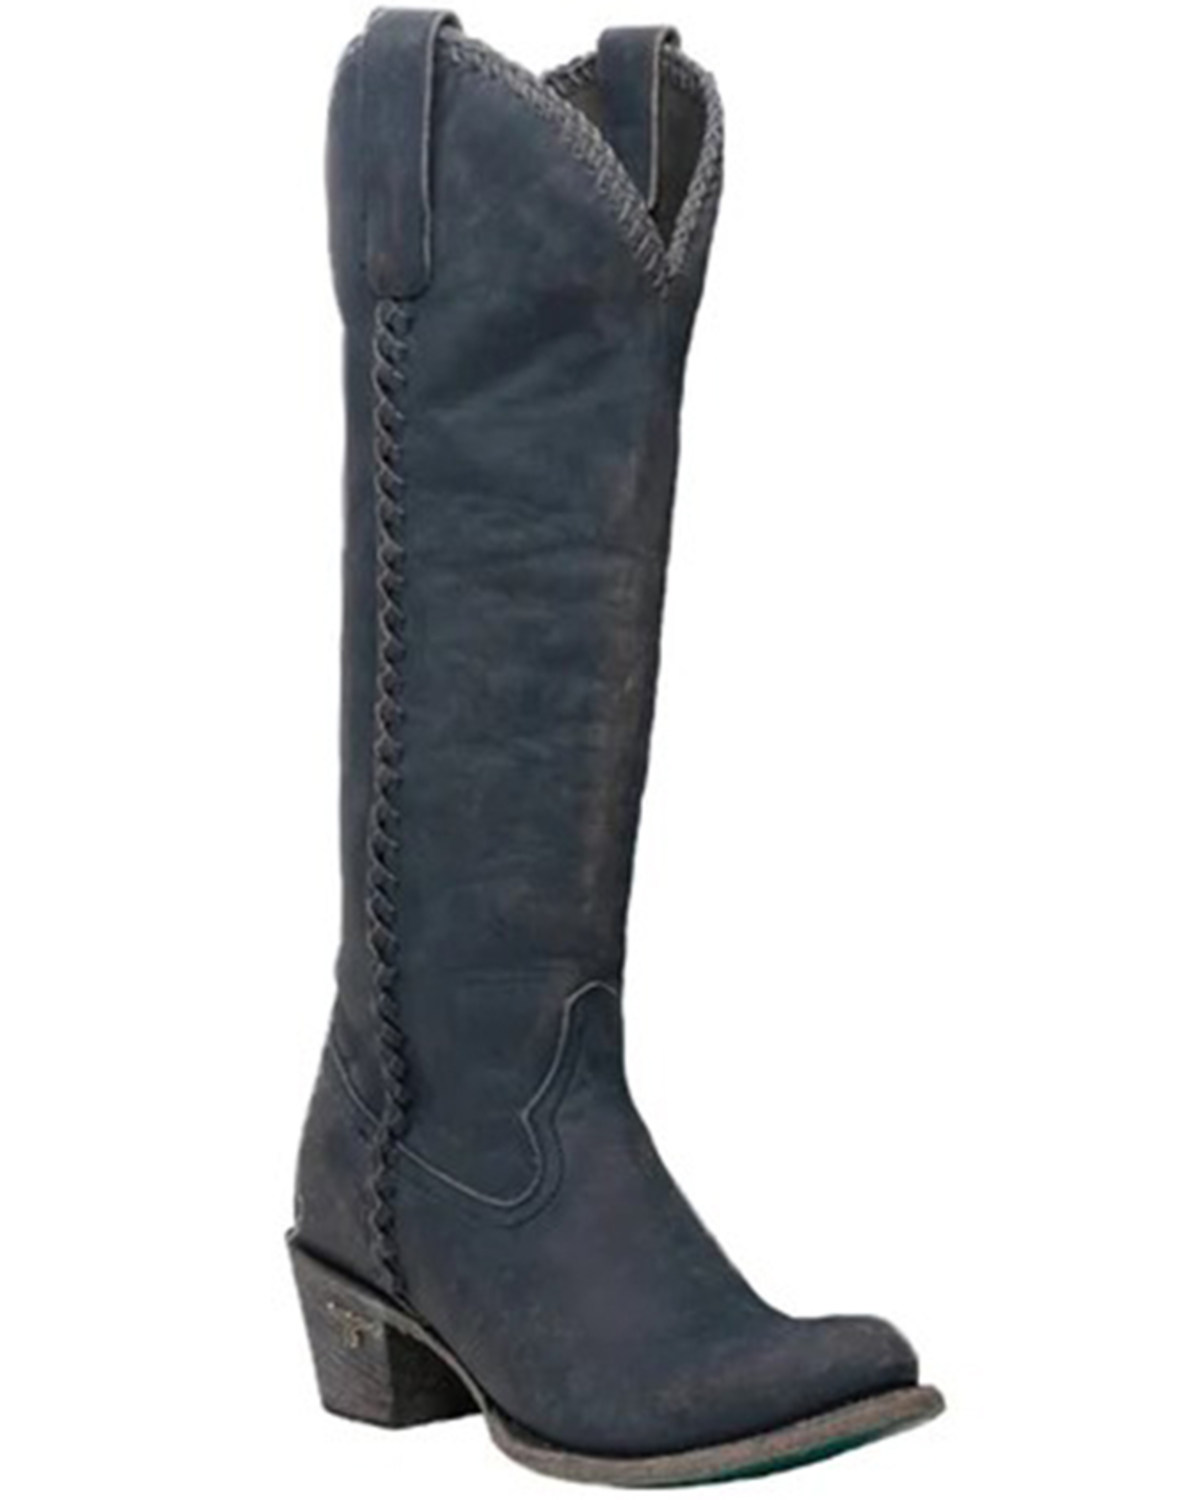 Lane Women's Plane Jane Western Tall Boots - Pointed Toe